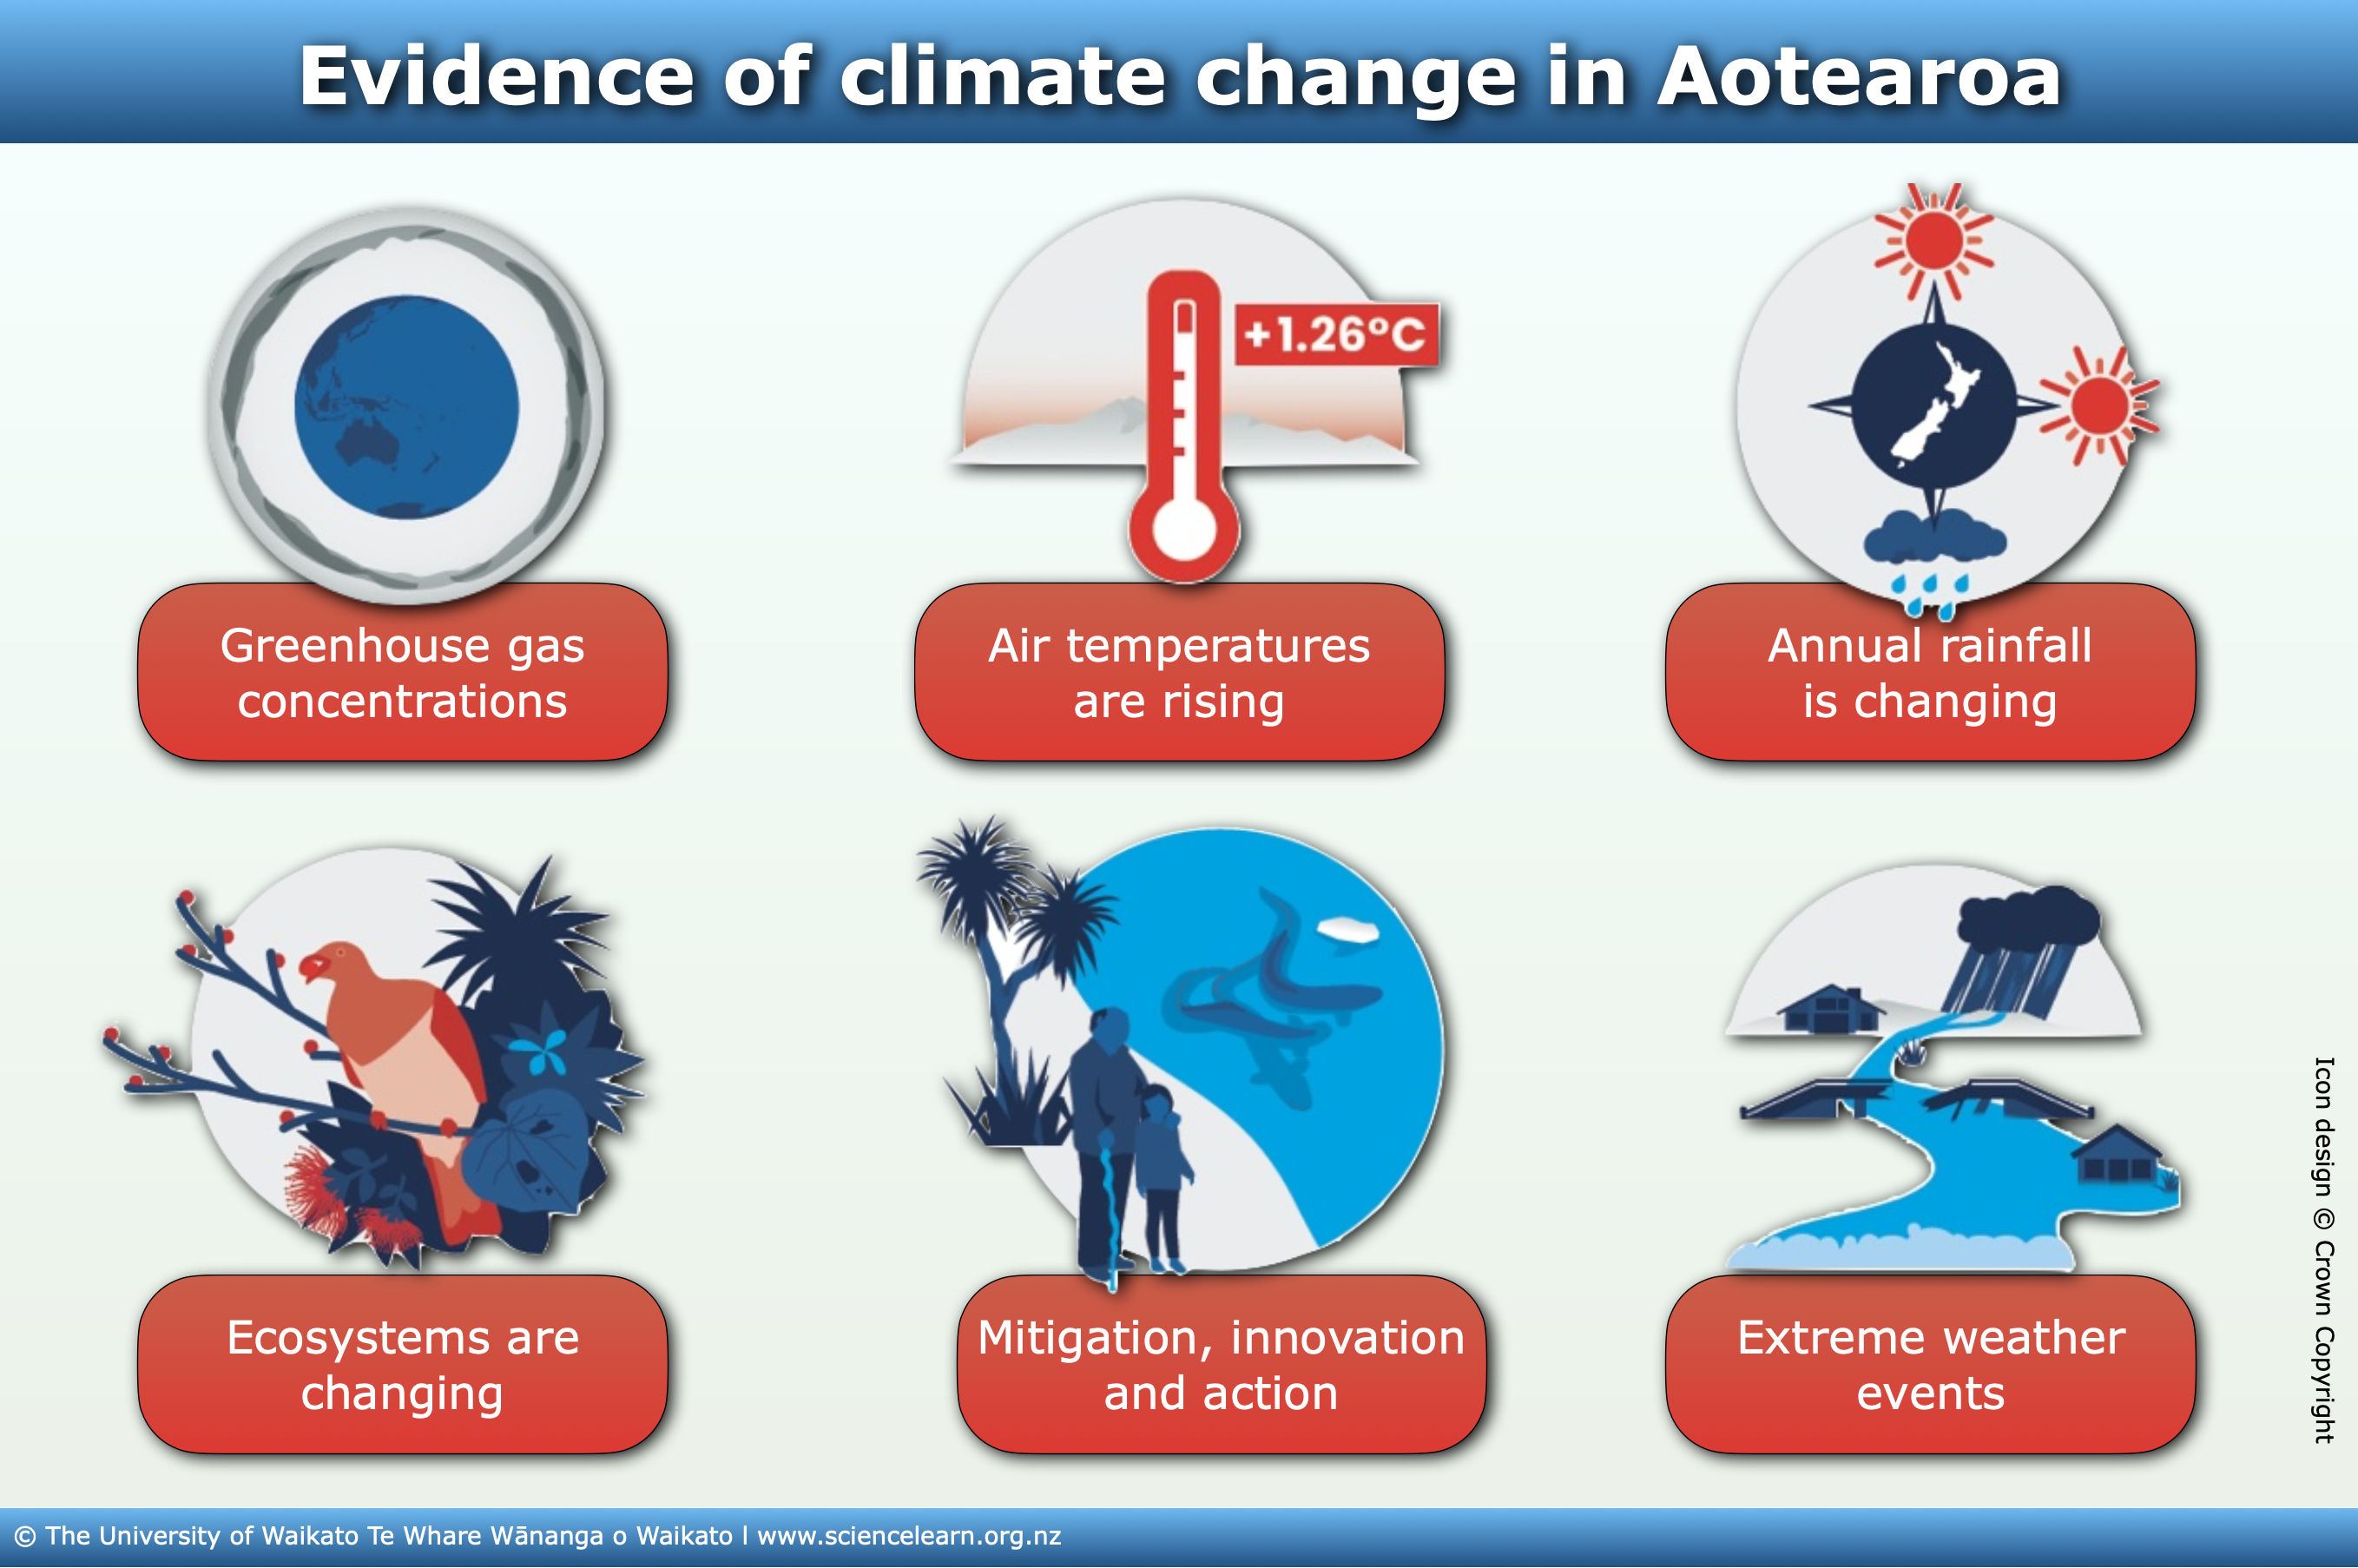 This interactive image map displays 6 icons associated with indicators of climate change and climate action.